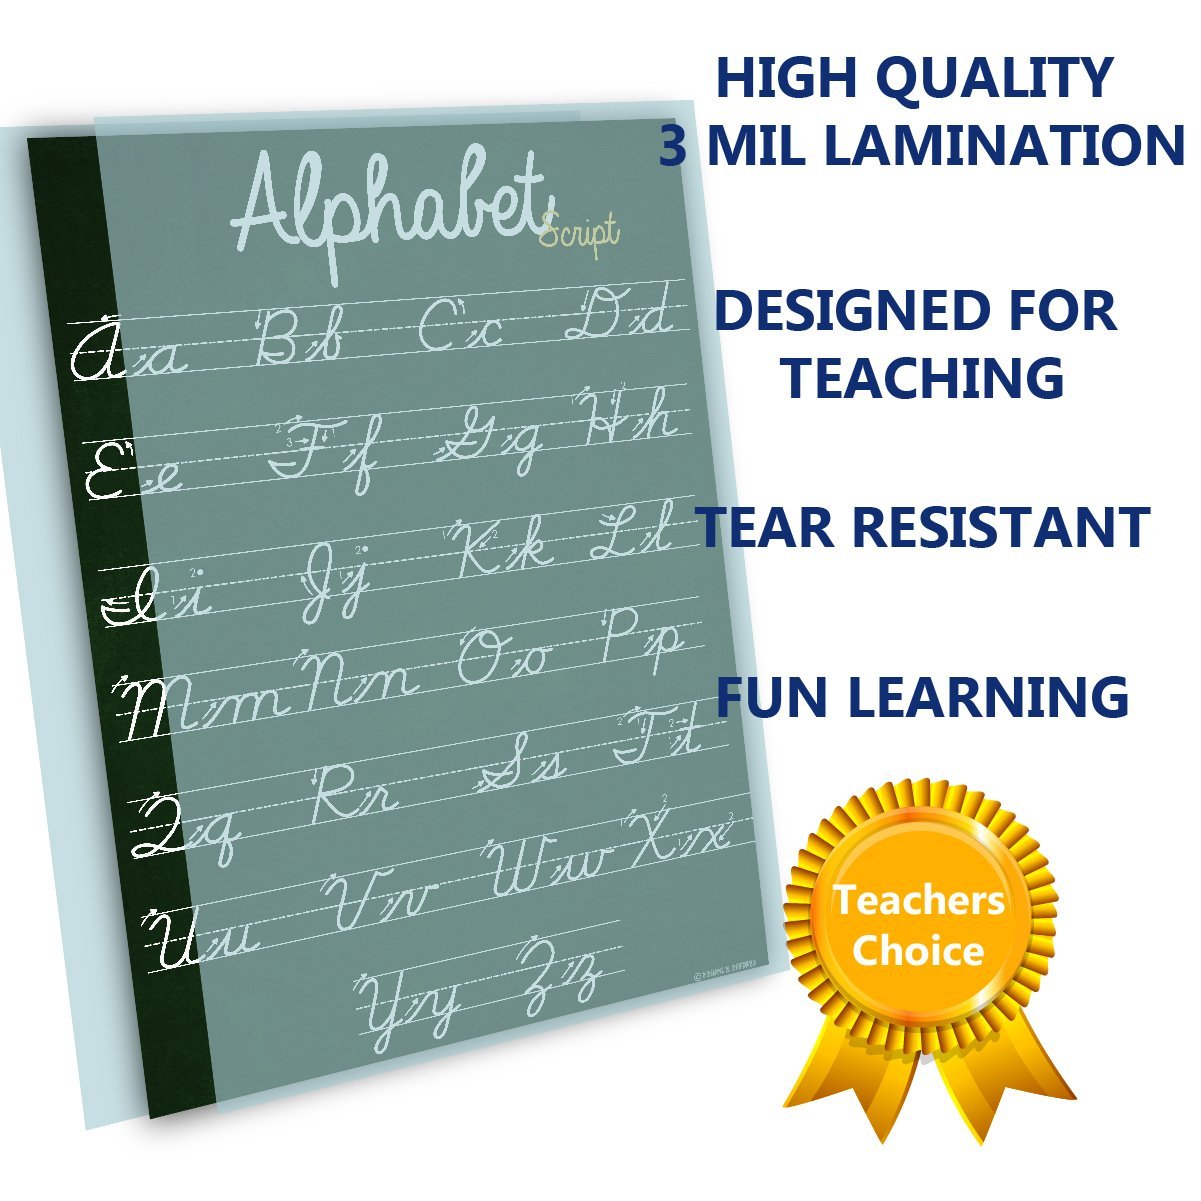 ABC Cursive Script Alphabet poster STANDARD SIZE chart LAMINATED teaching classroom decoration Young N Refined - image 2 of 4